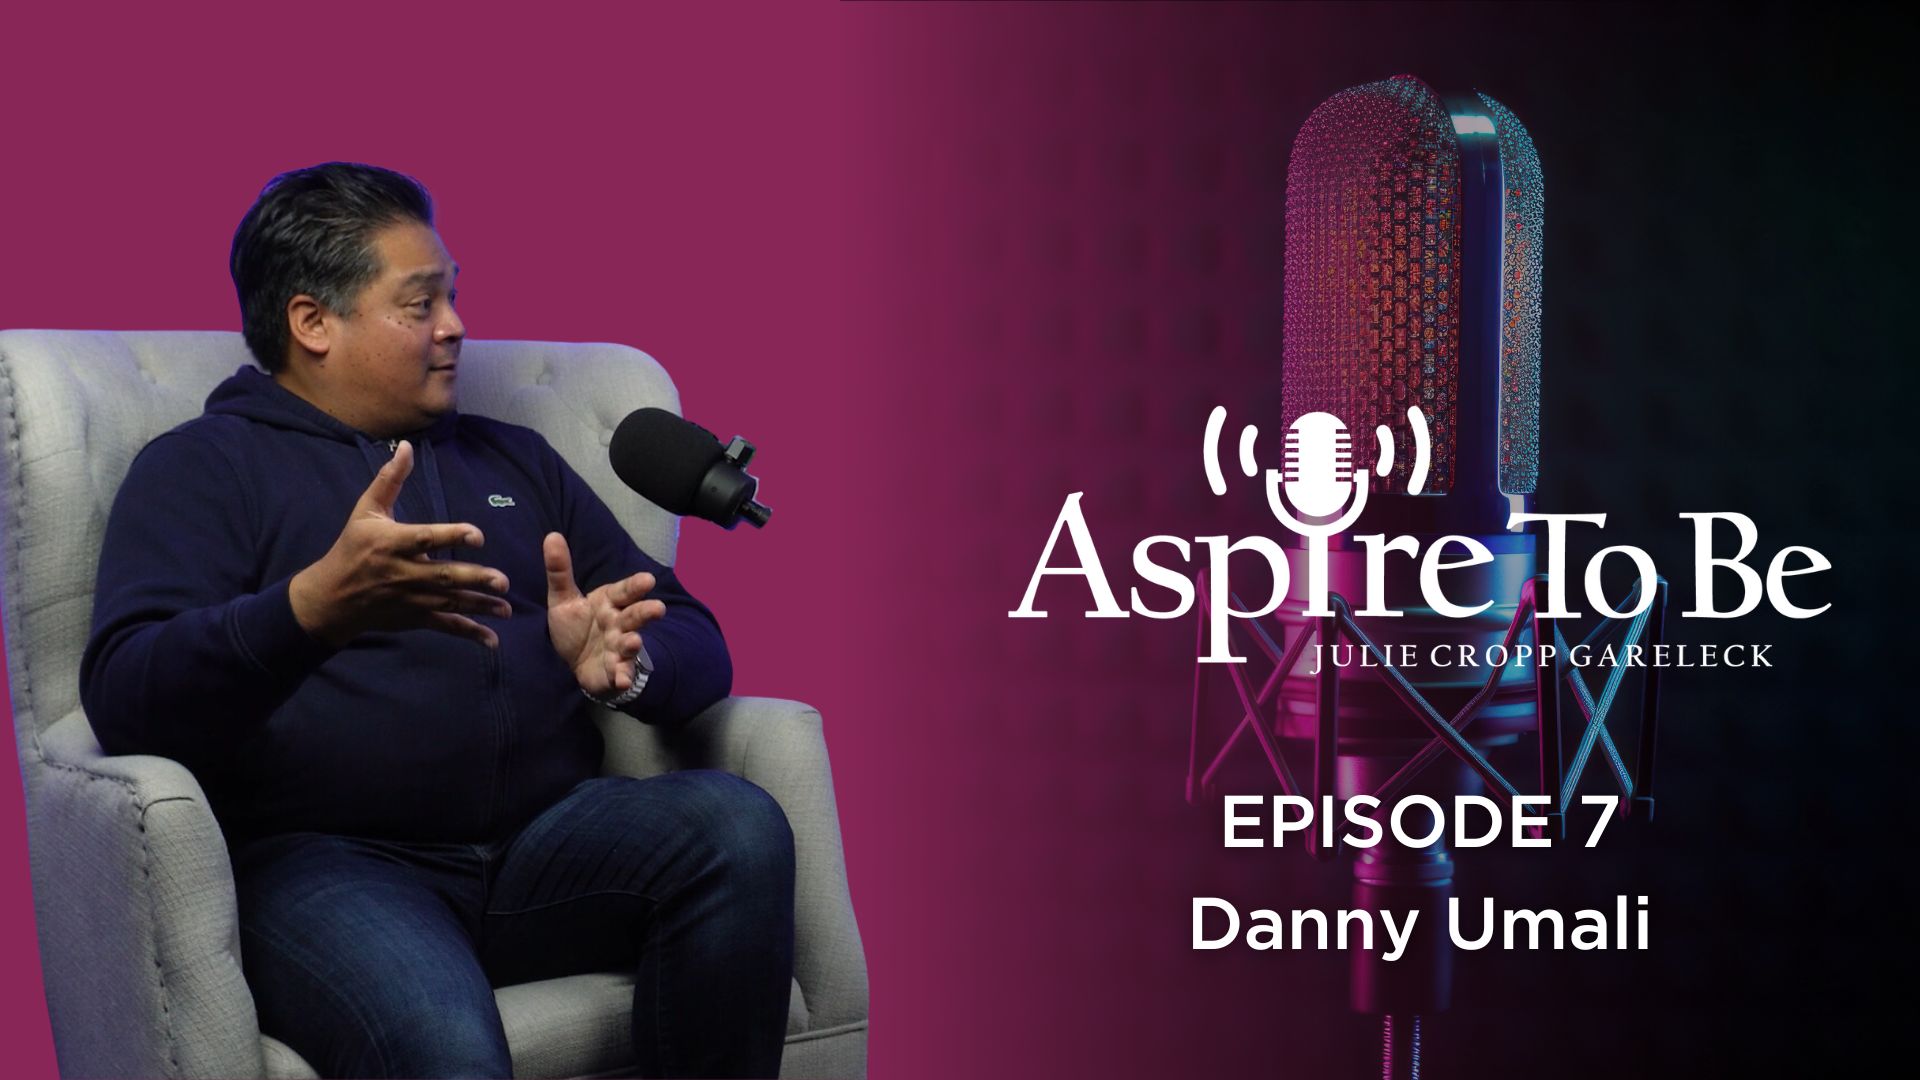 Danny Umali on the Aspire to Be Podcast